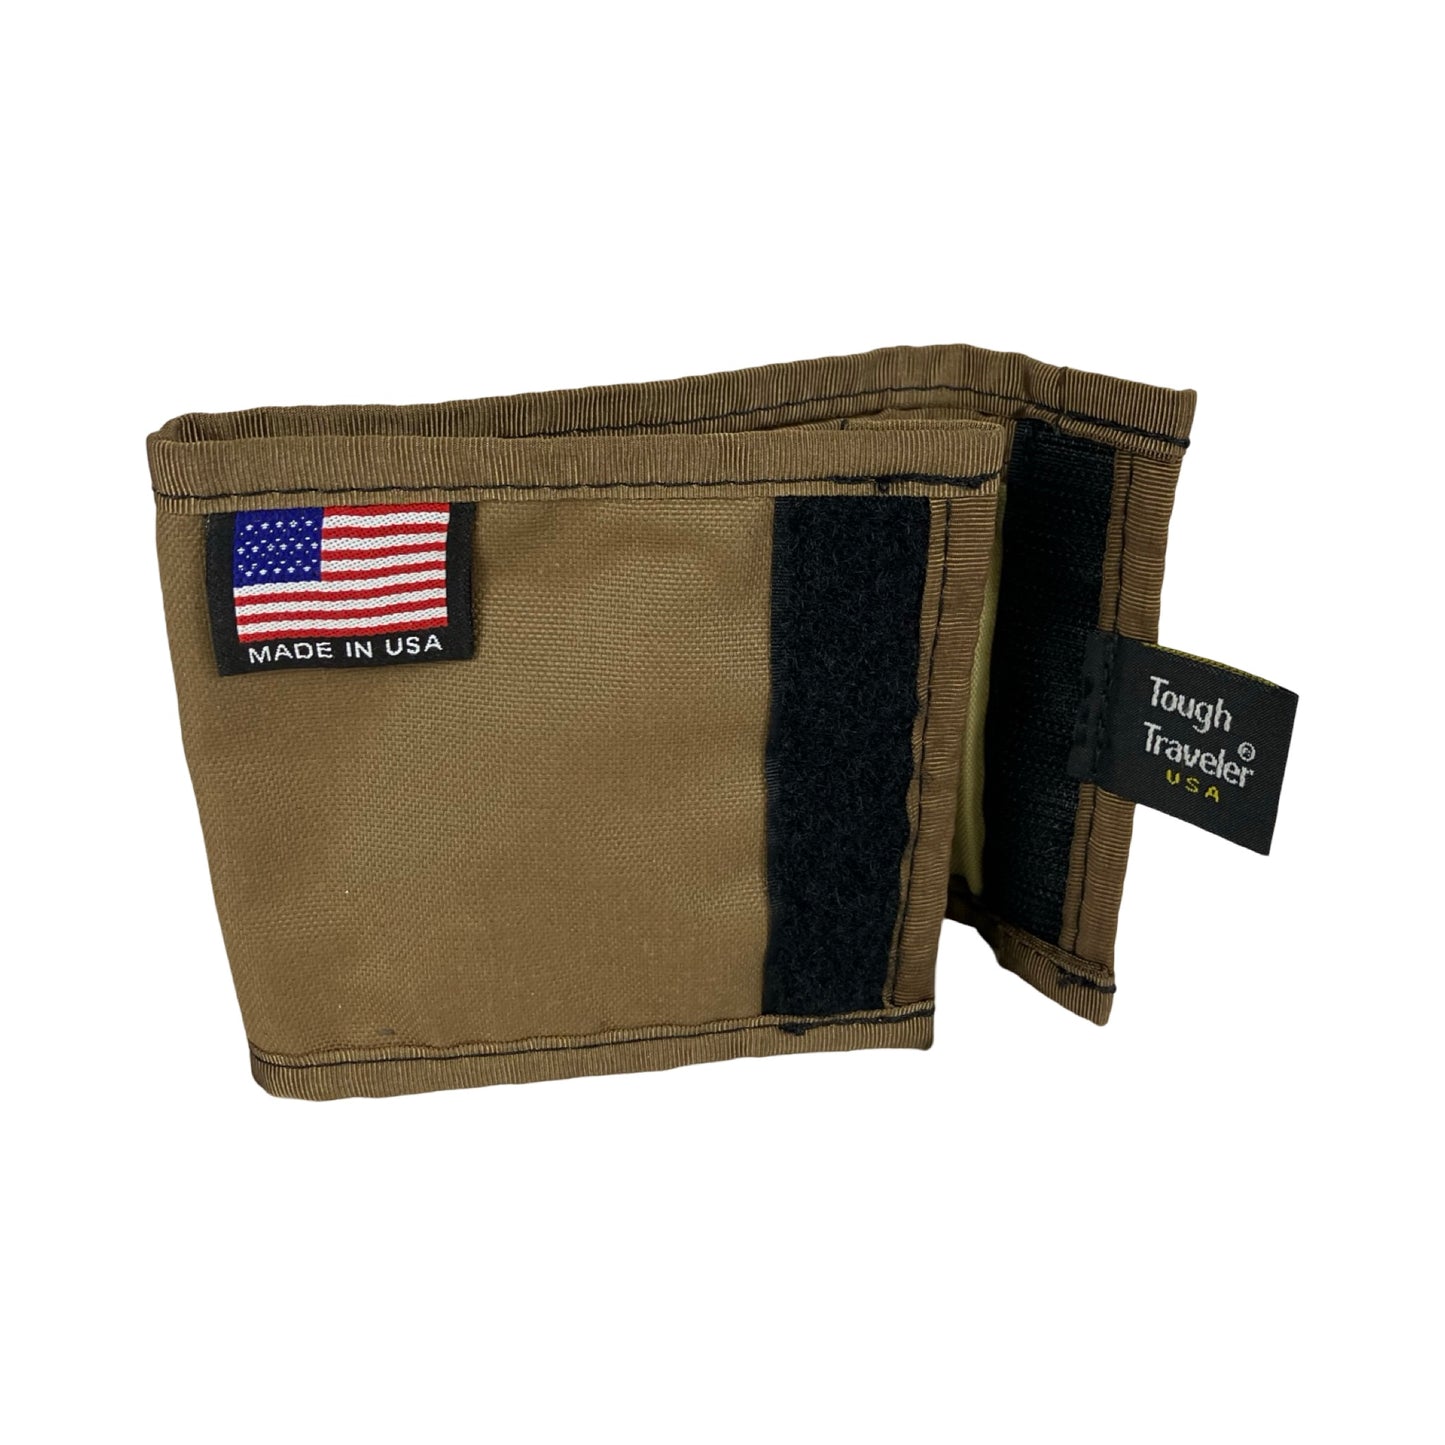 WALLET (SMALL) Wallets, by Tough Traveler. Made in USA since 1970